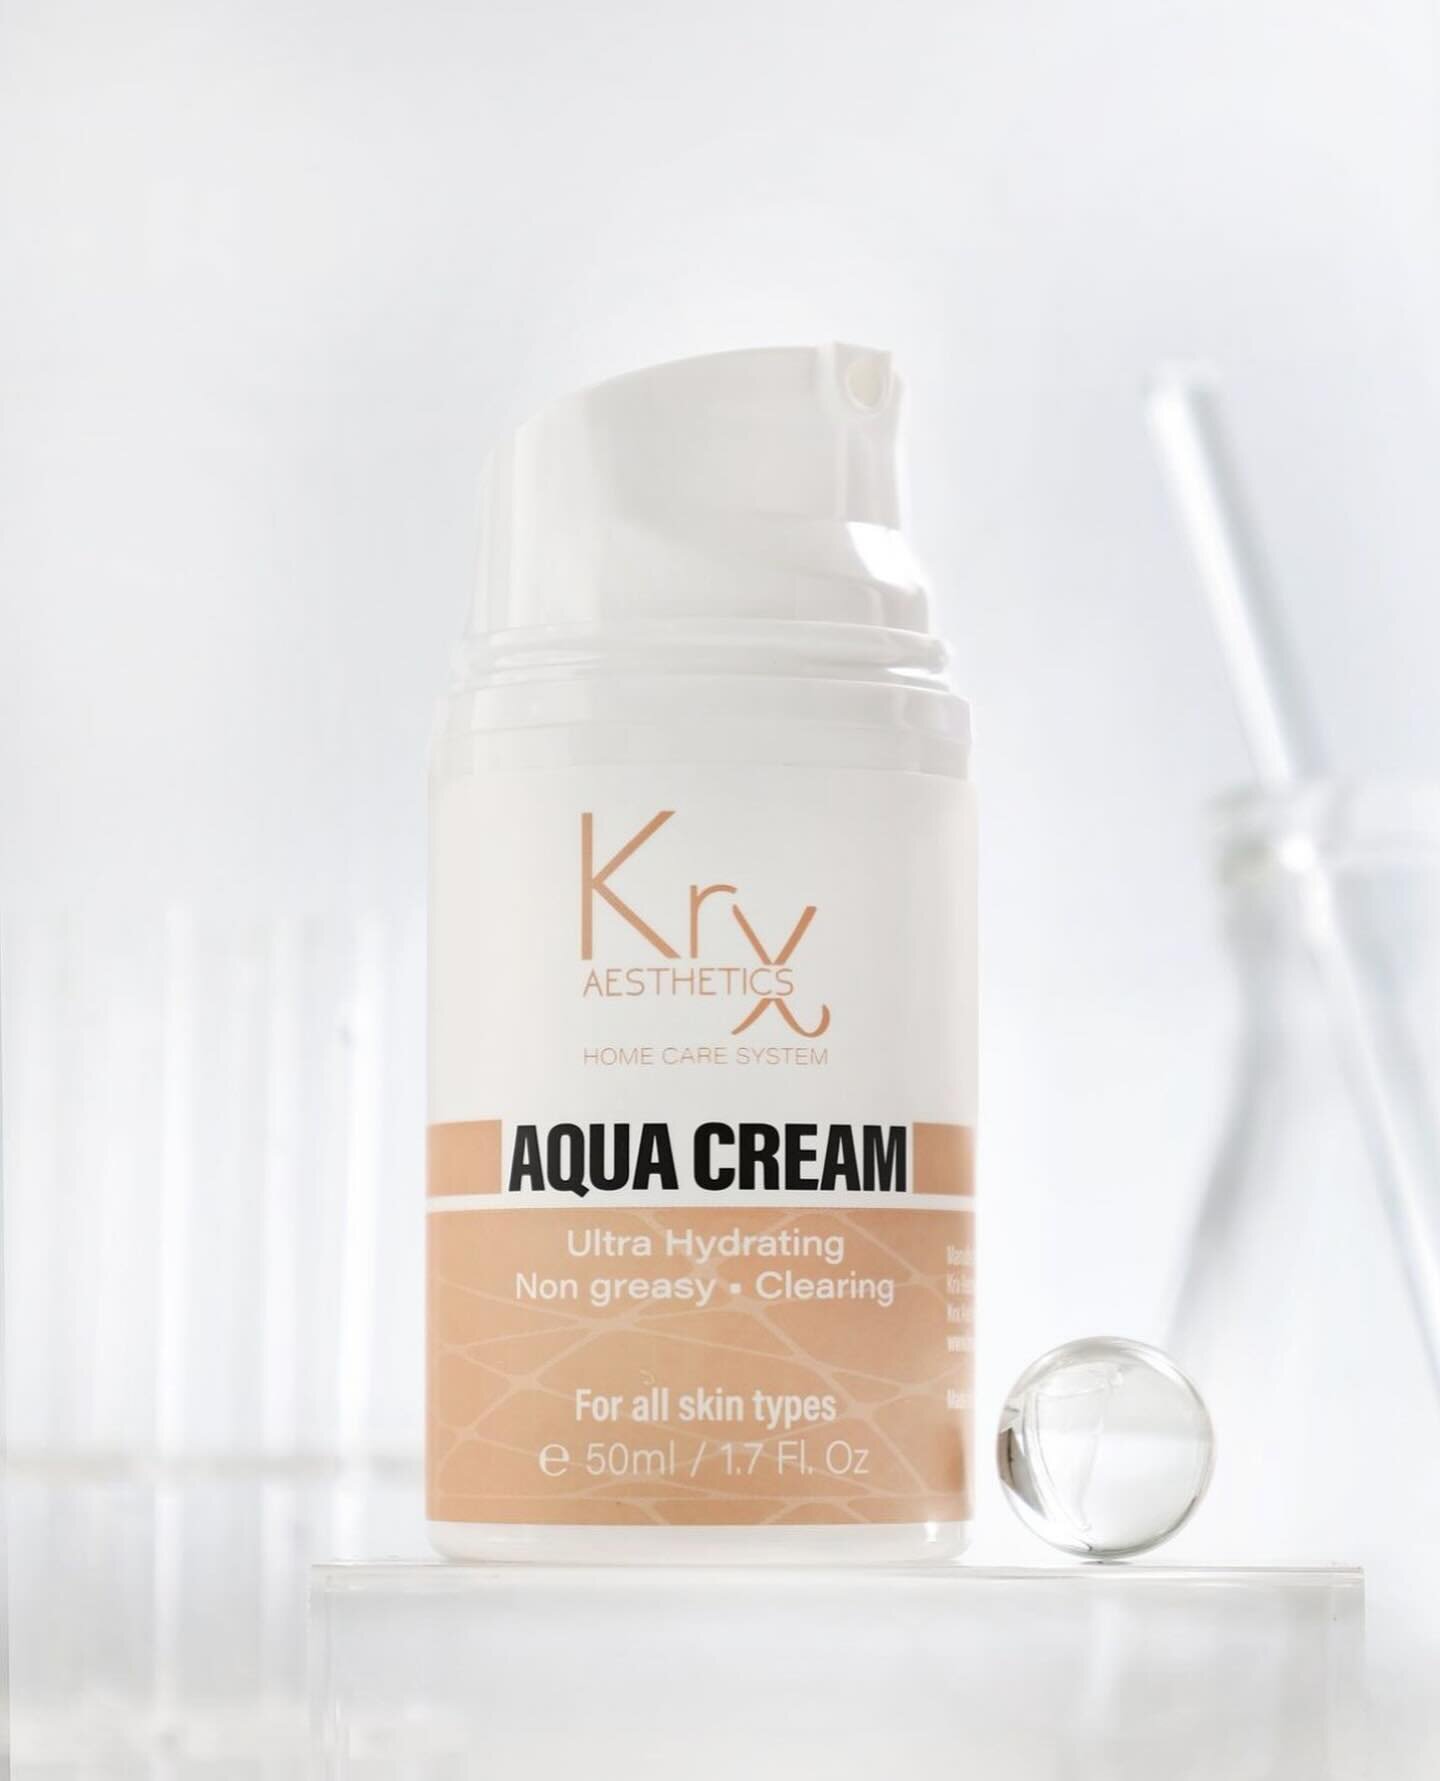 ✨ Say hello to radiant skin with the KRX Aqua Cream! 💦 

Say goodbye to heavy moisturizers and hello to lightweight hydration that melts into your skin like magic! ✨  with this cream-to-water moisturizer!
Perfect for combination, oily, and acne-pron